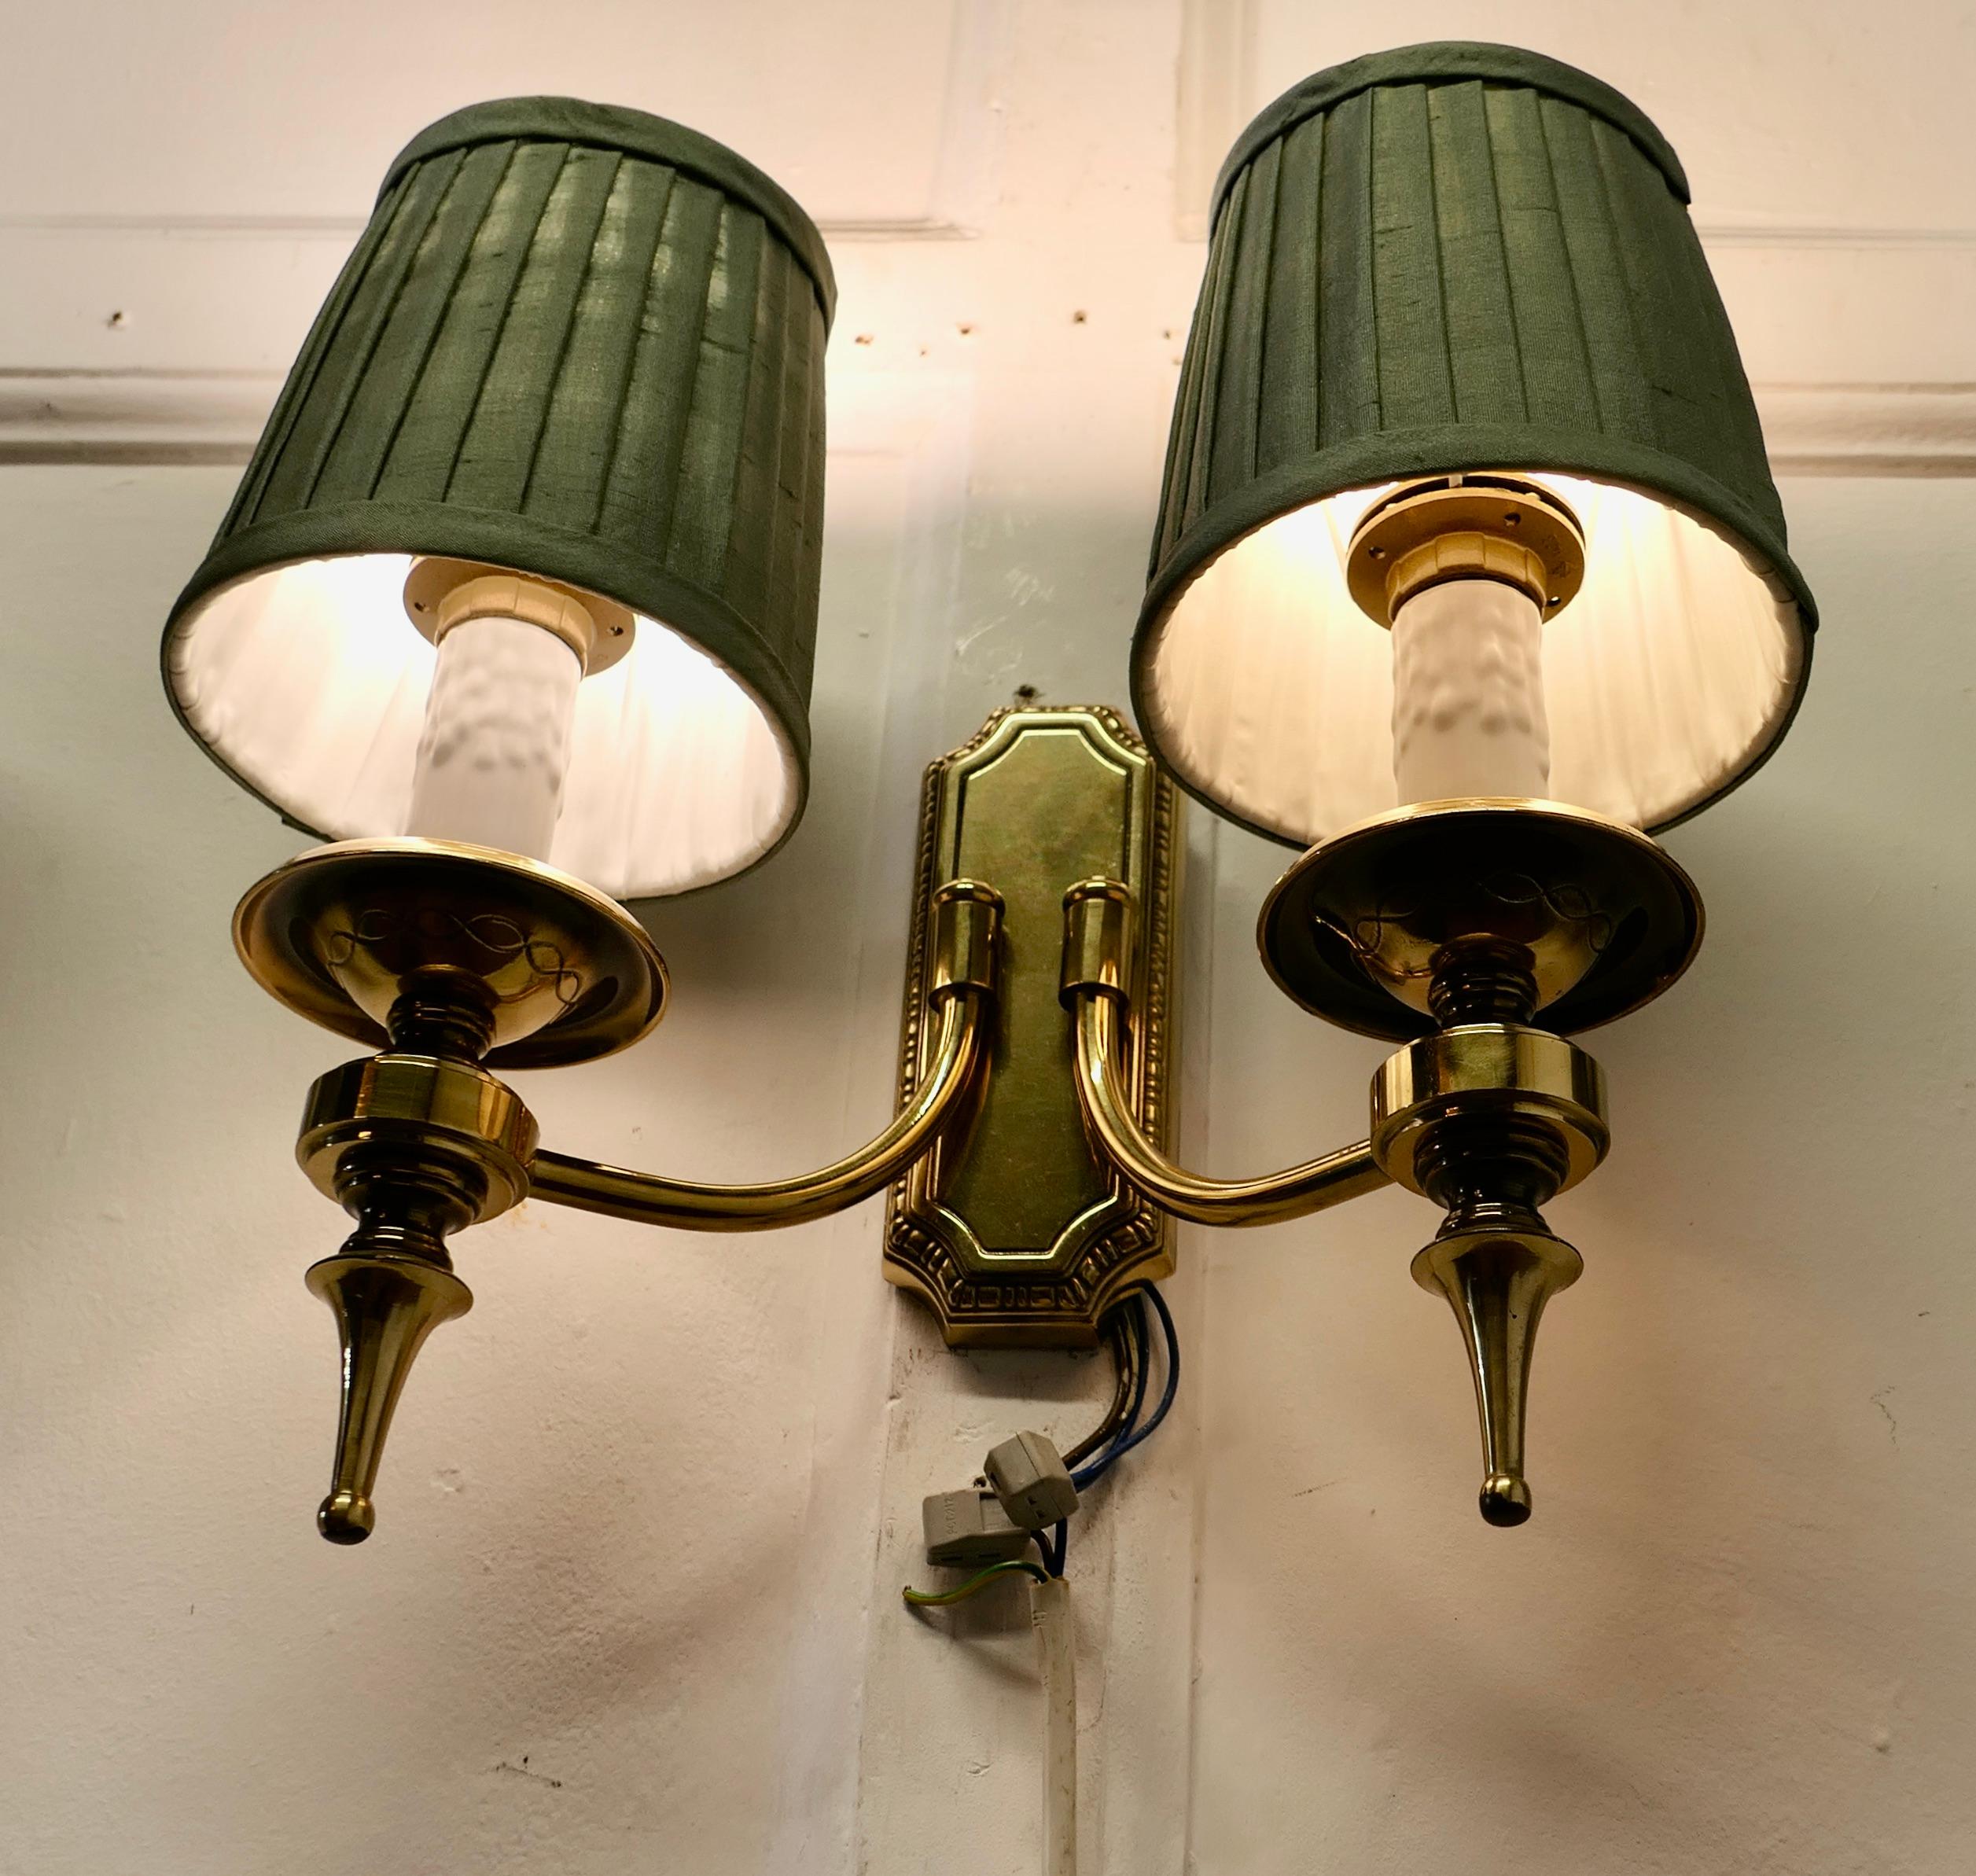 A Set of 4 Twin Wall Lights  A very handsome set of 4 double wall lights  1